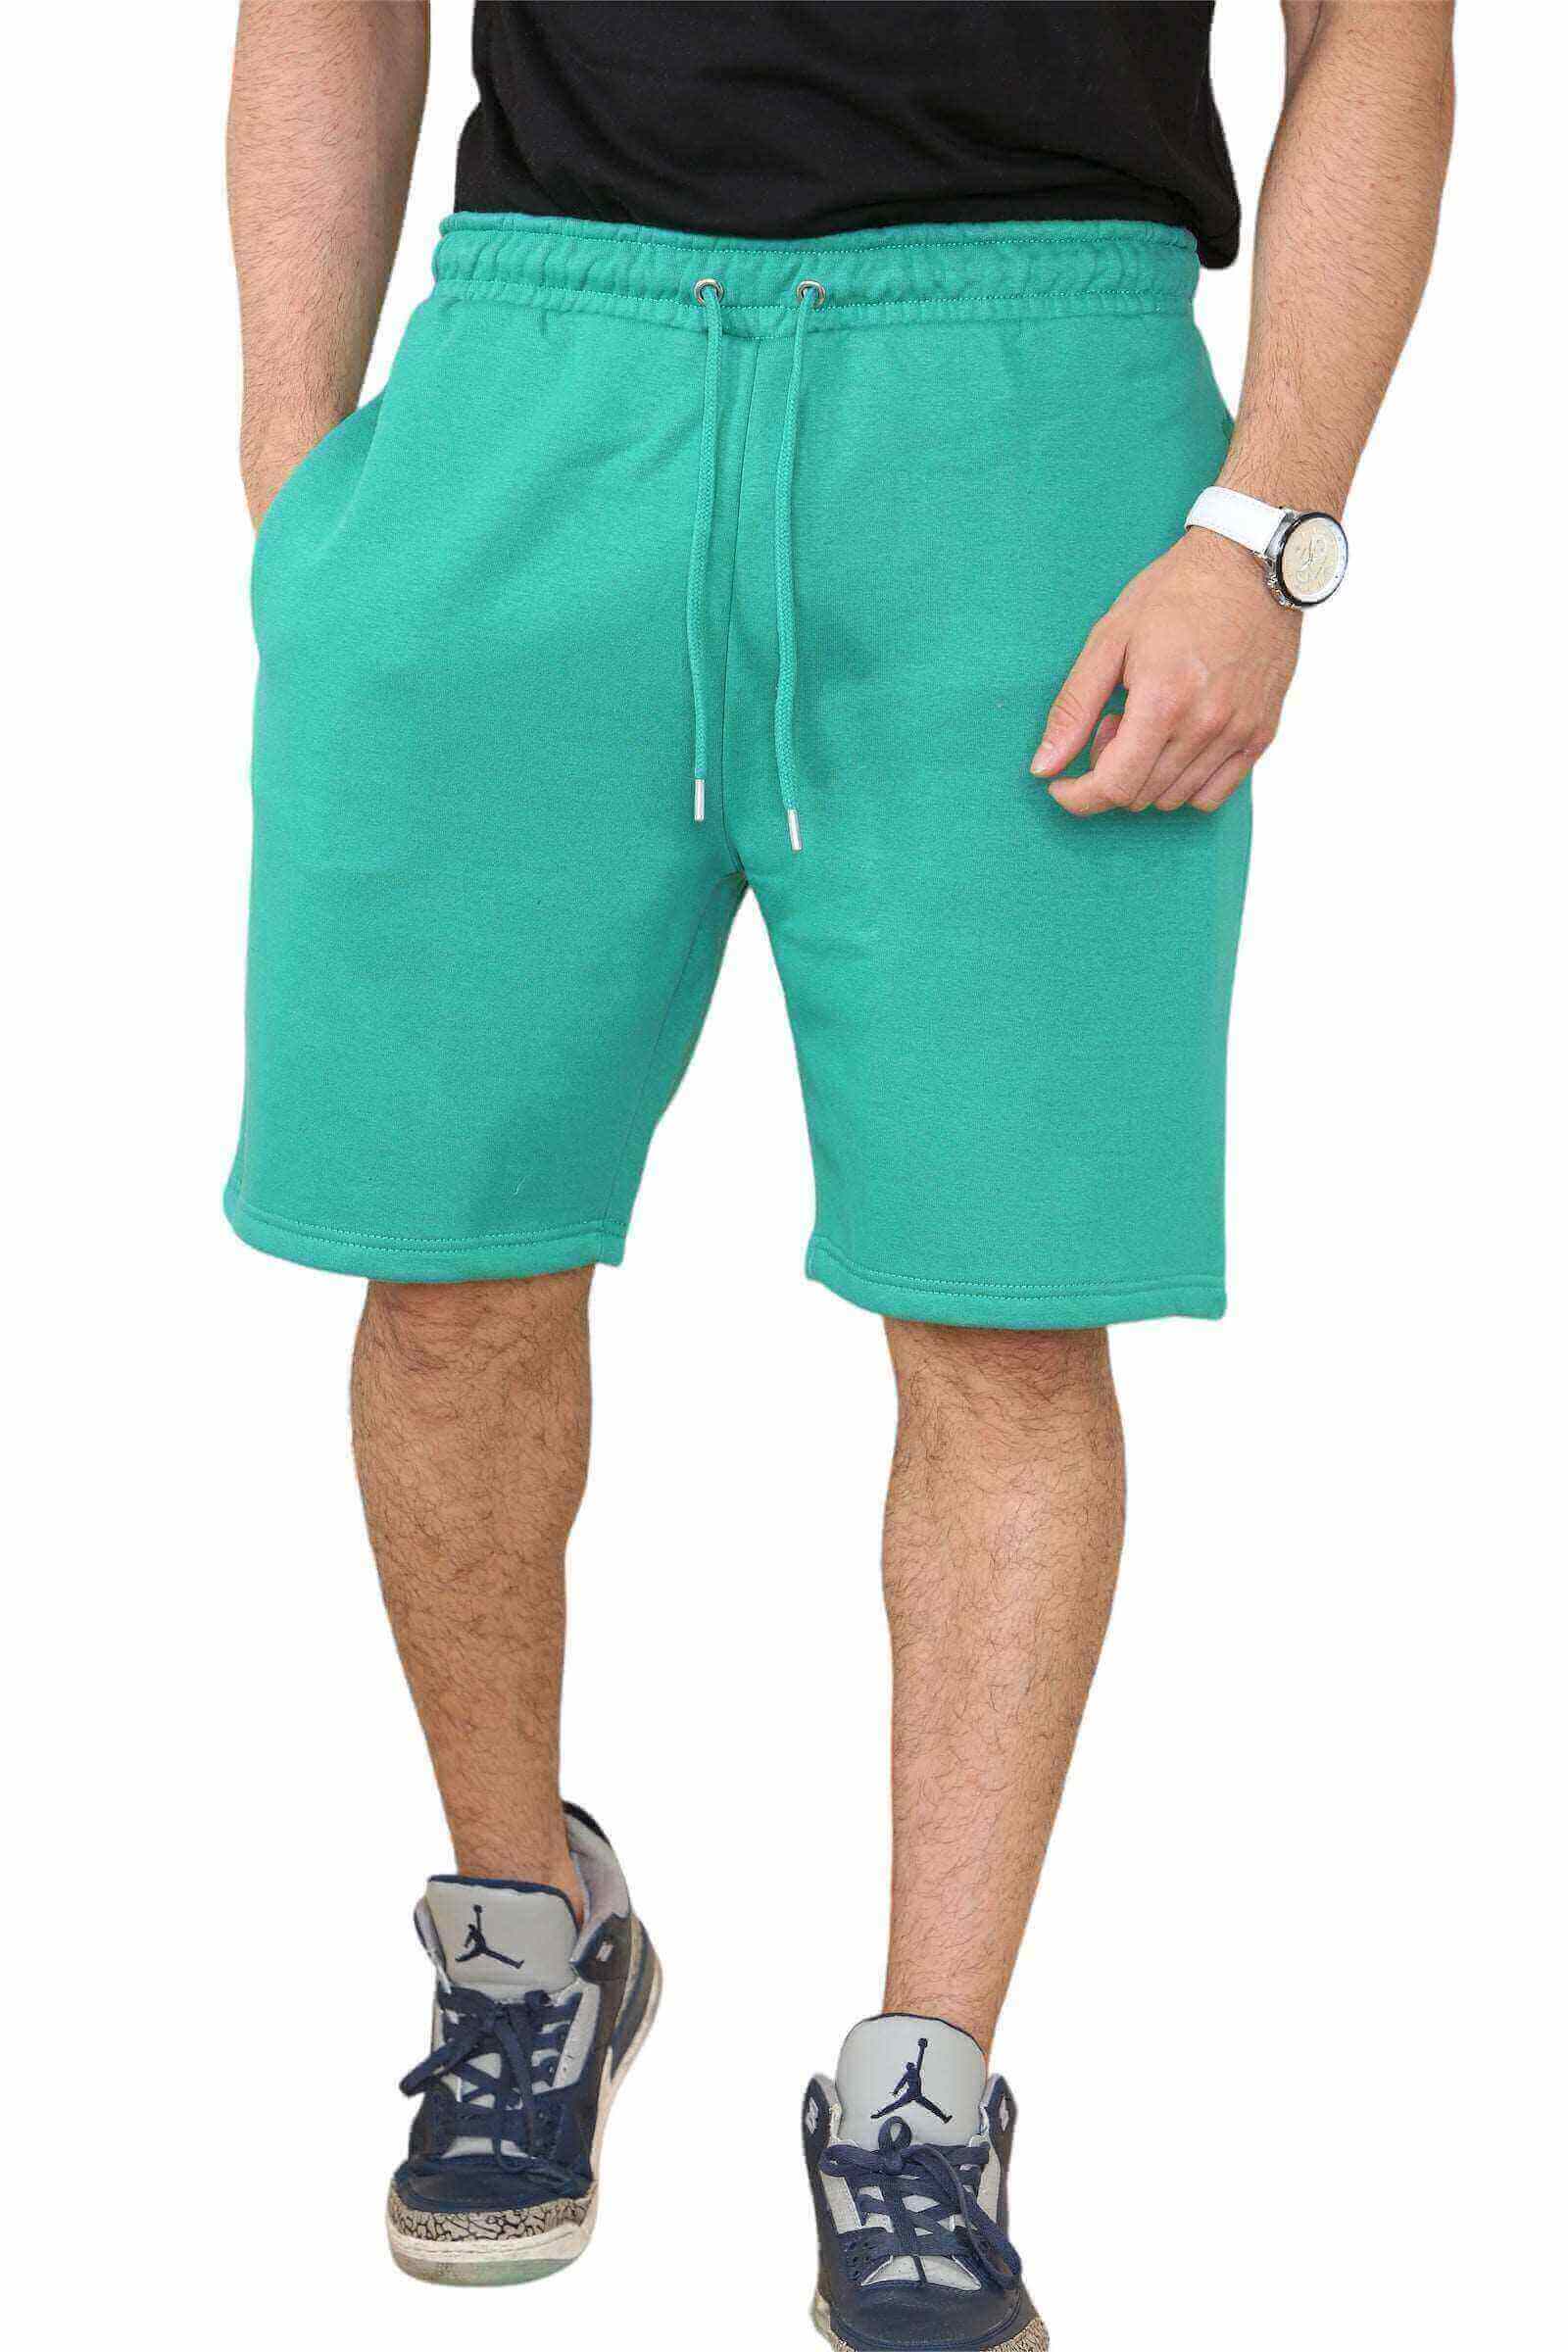 Close View of Men's Gym Shorts in Sage for Your Active Lifestyle